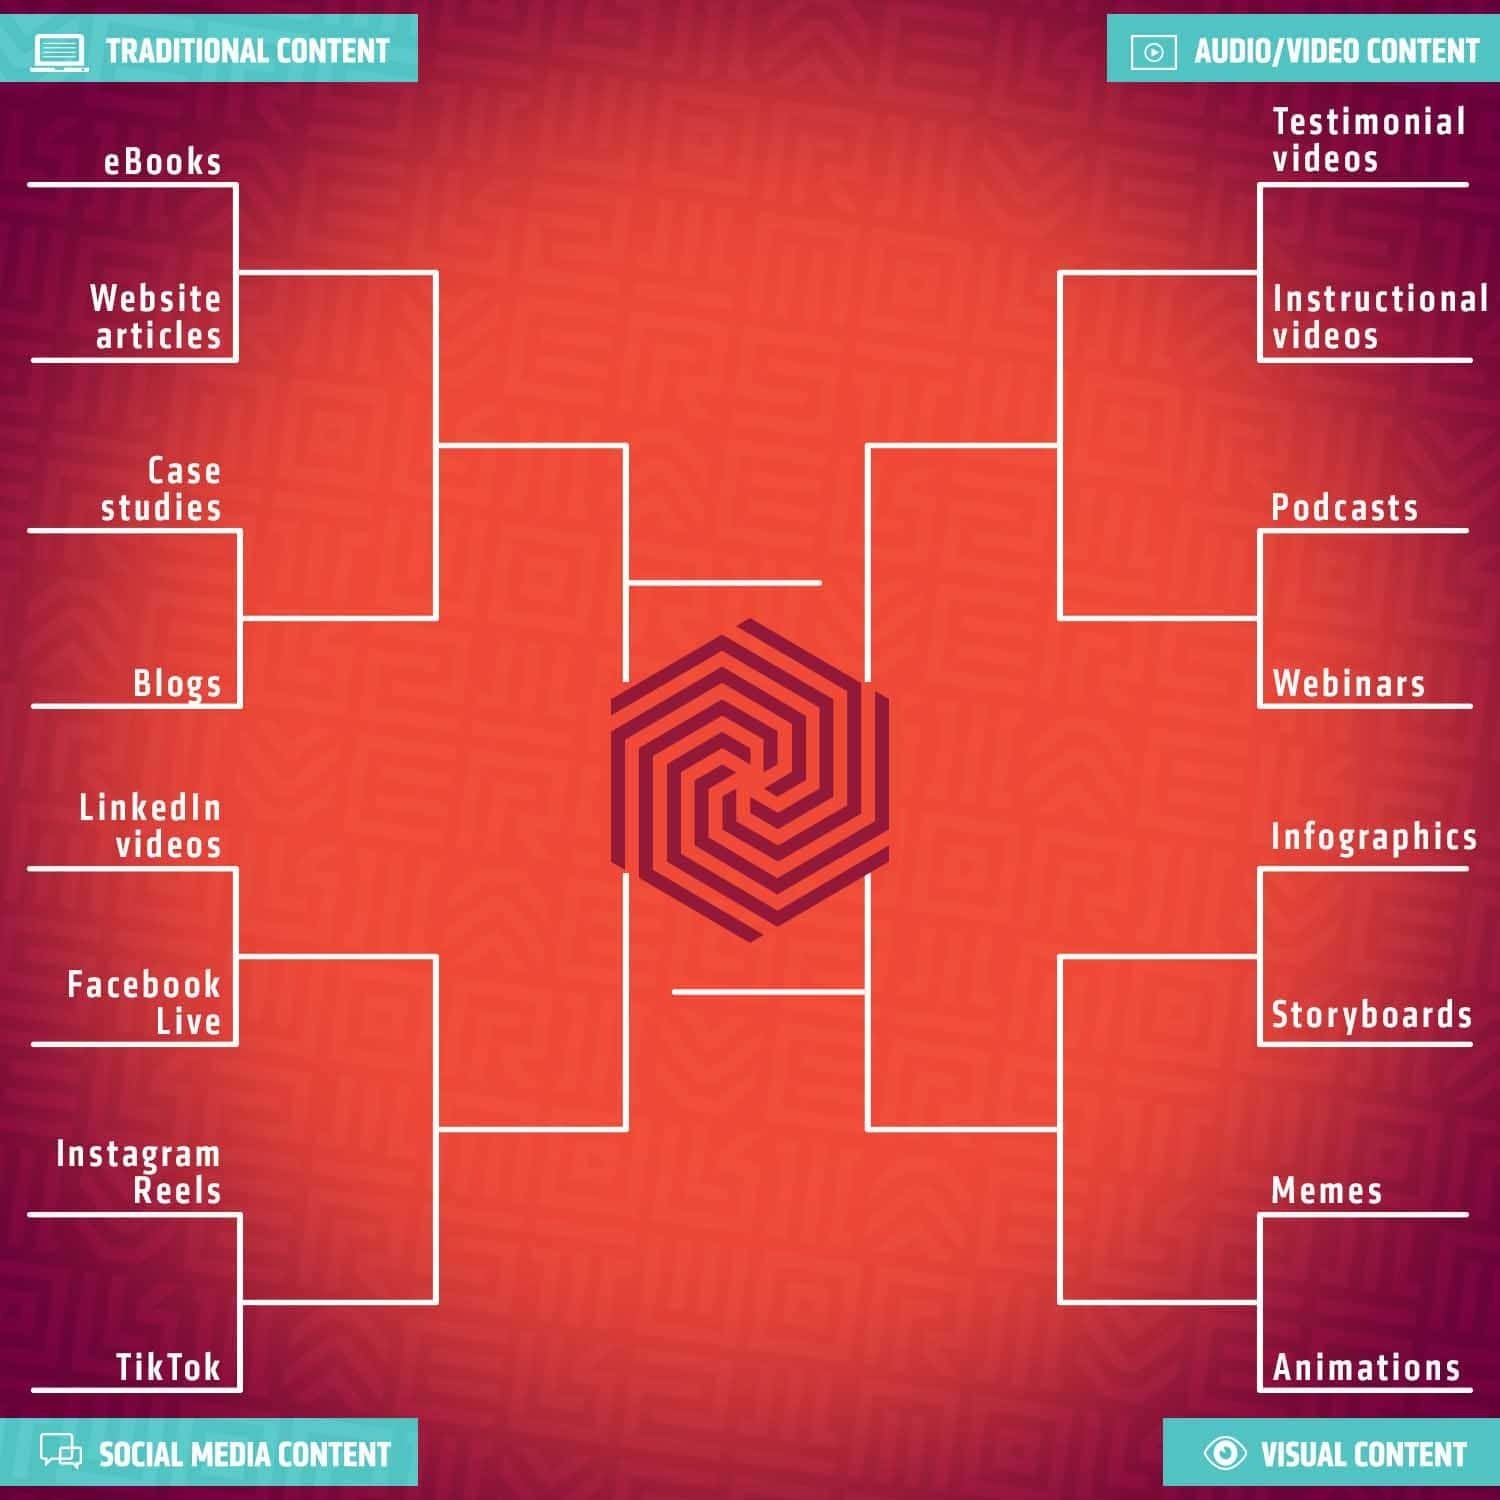 Marketing content bracket on red background with four regions in blue: Traditional, audio/video, social media, and visual.